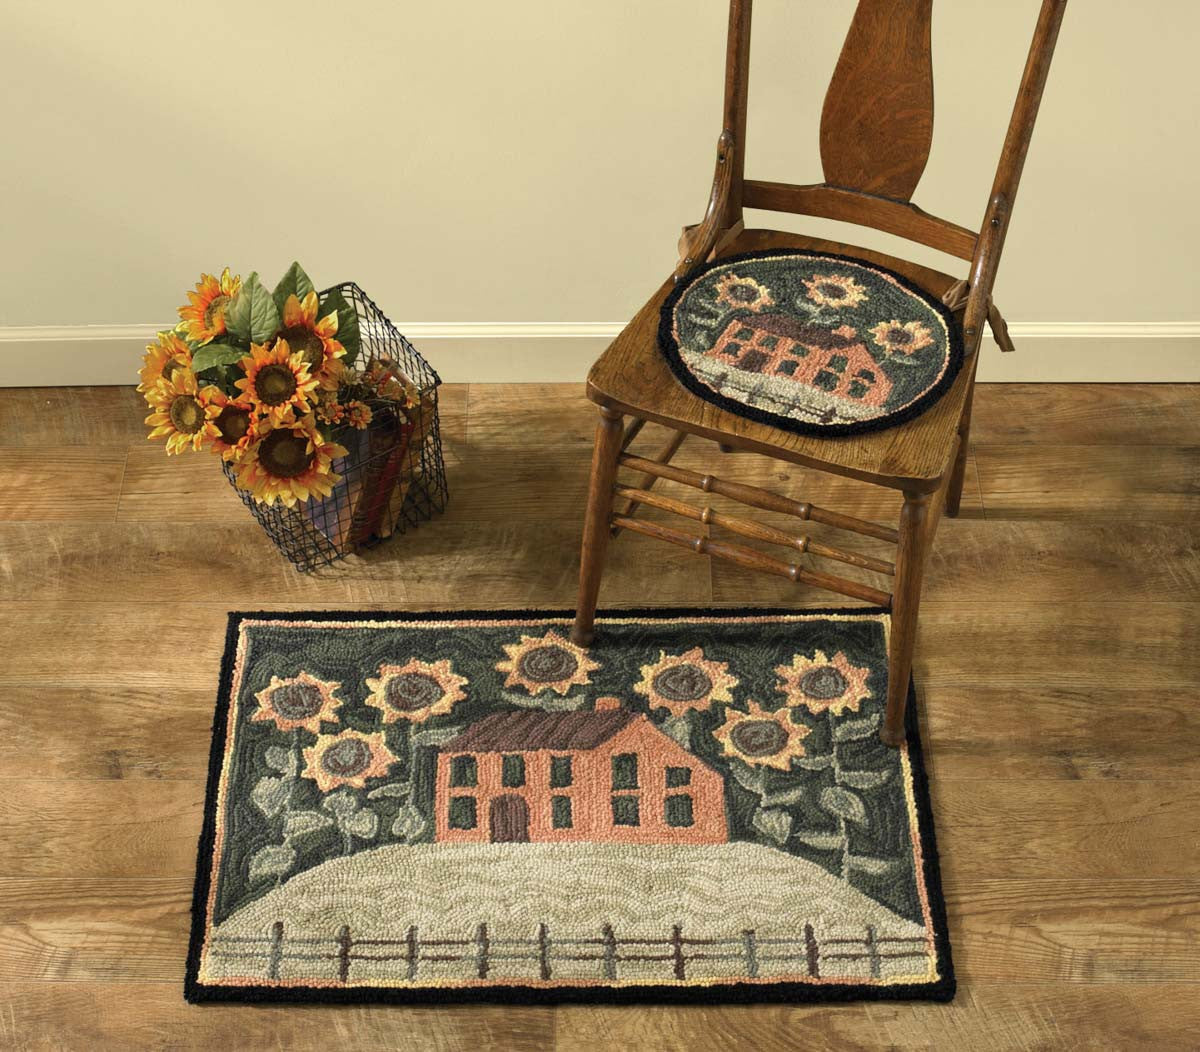 Park Designs House & Sunflowers Hooked Rug